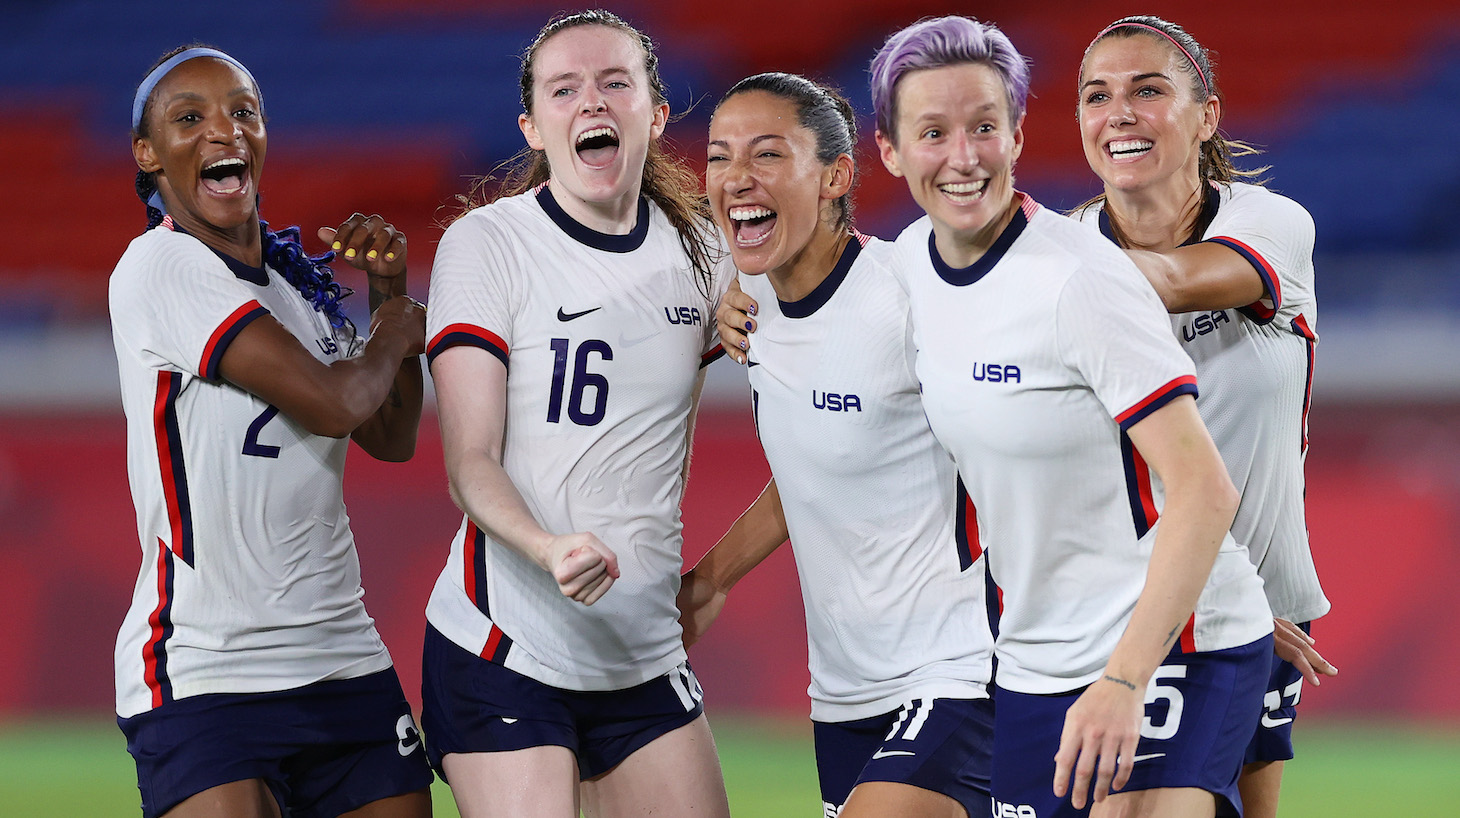 Crystal Dunn #2, Rose Lavelle #16, Christen Press #11, Megan Rapinoe #15 and Alex Morgan #13 of Team United States celebrate following their team's victory in the penalty shoot out after the Women's Quarter Final match between Netherlands and United States on day seven of the Tokyo 2020 Olympic Games at International Stadium Yokohama on July 30, 2021 in Yokohama, Kanagawa, Japan.